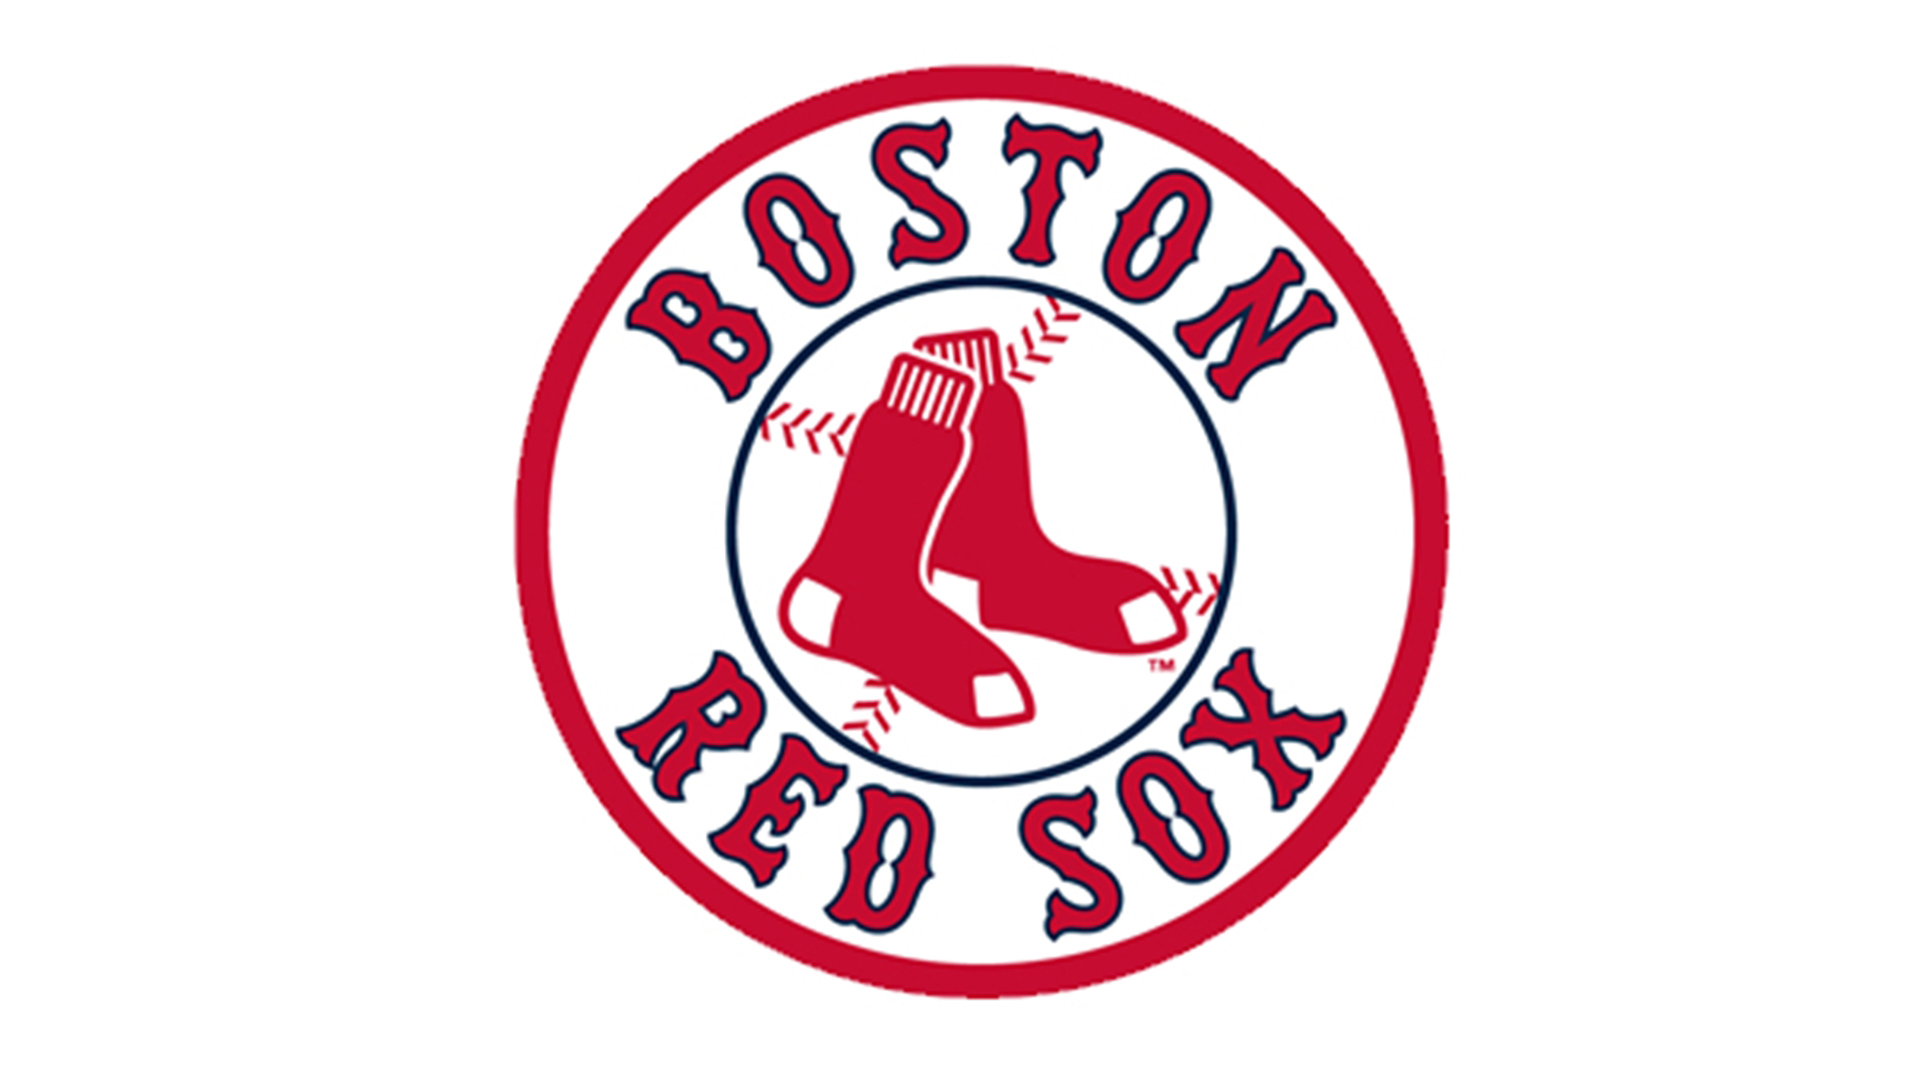 Boston Red Soxs player